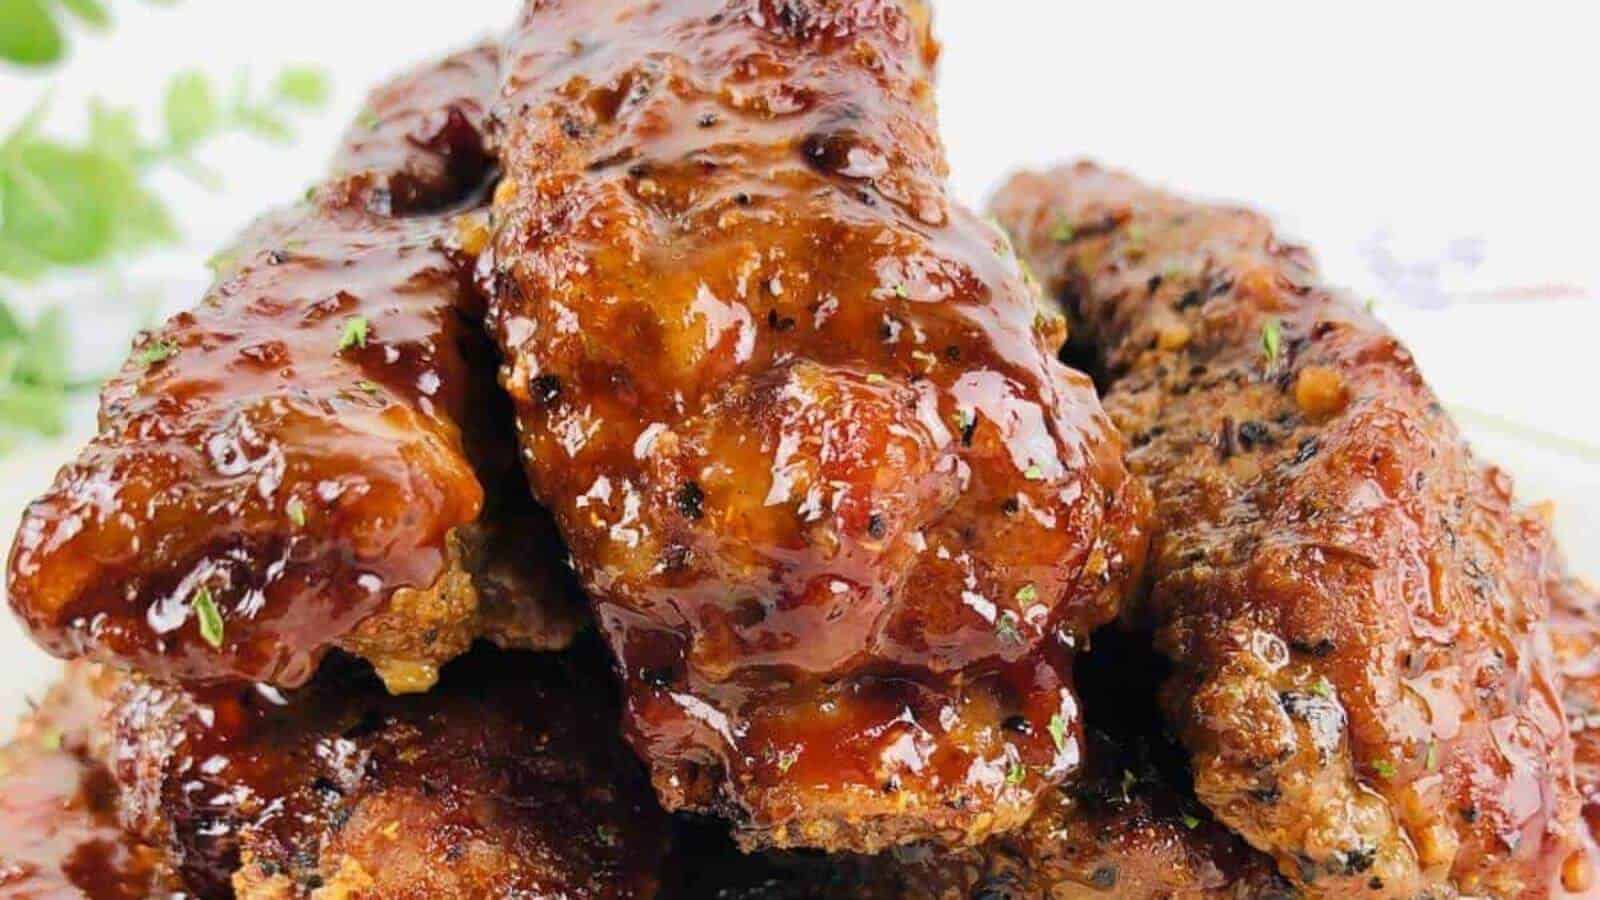 Pork ribs covered in barbecue sauce on a plate.